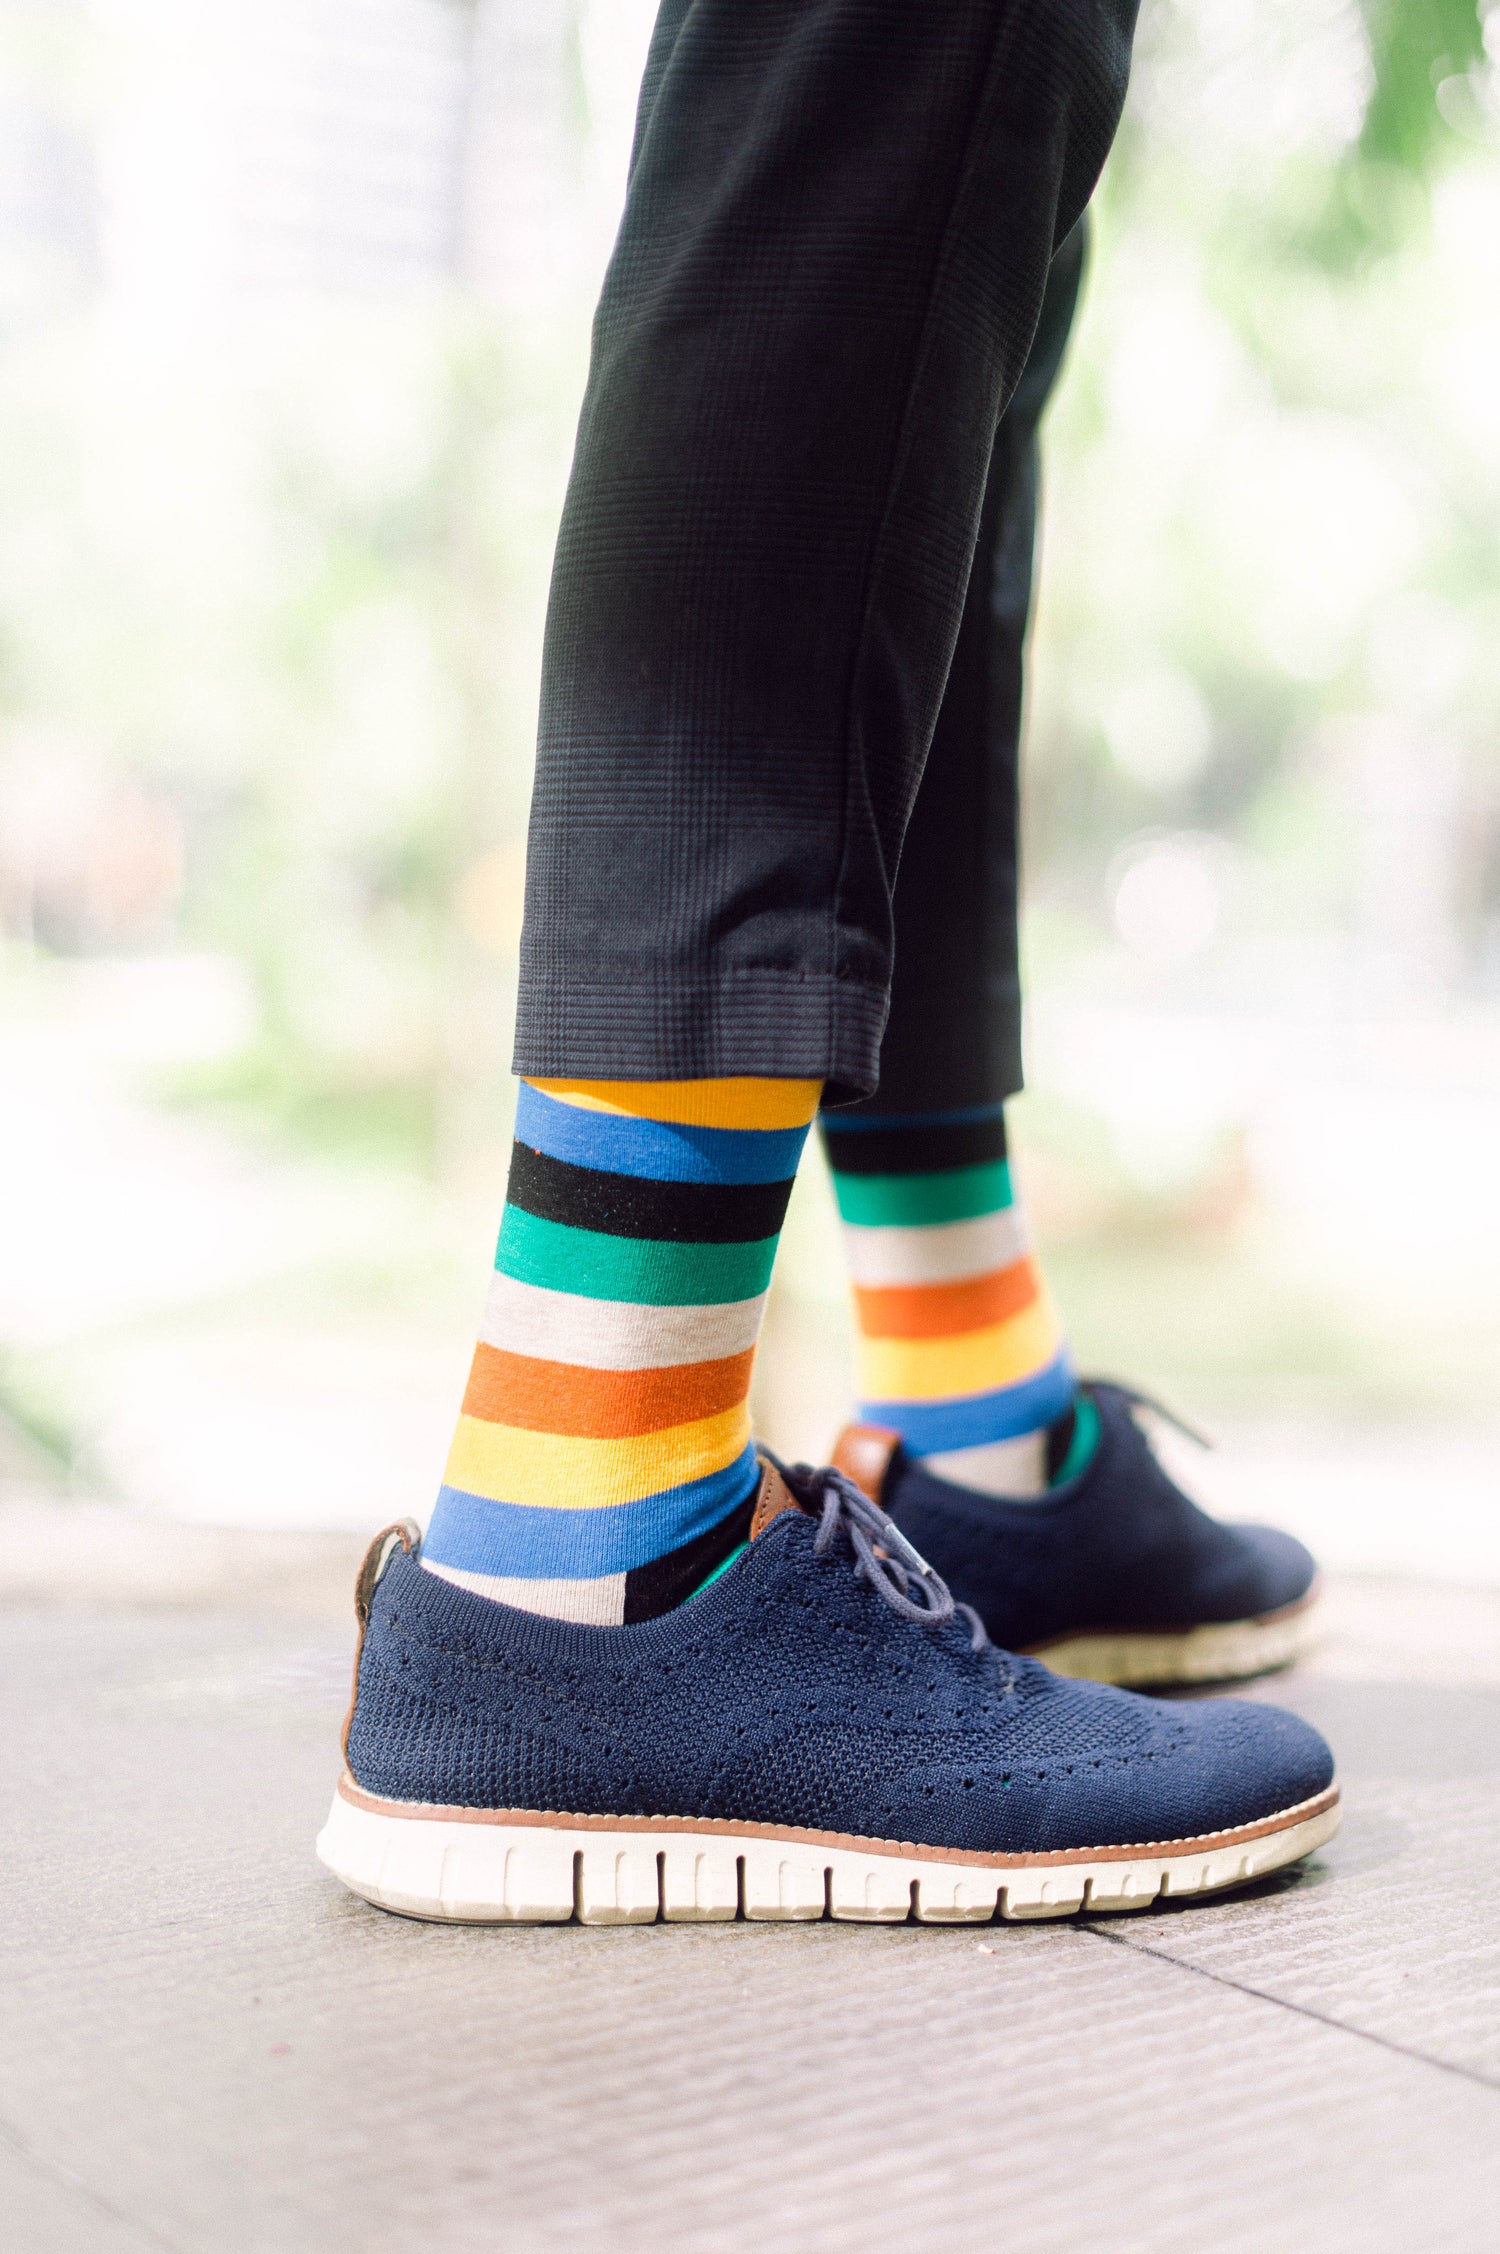 Man wearing blue sneakers and striped colorful printed socks